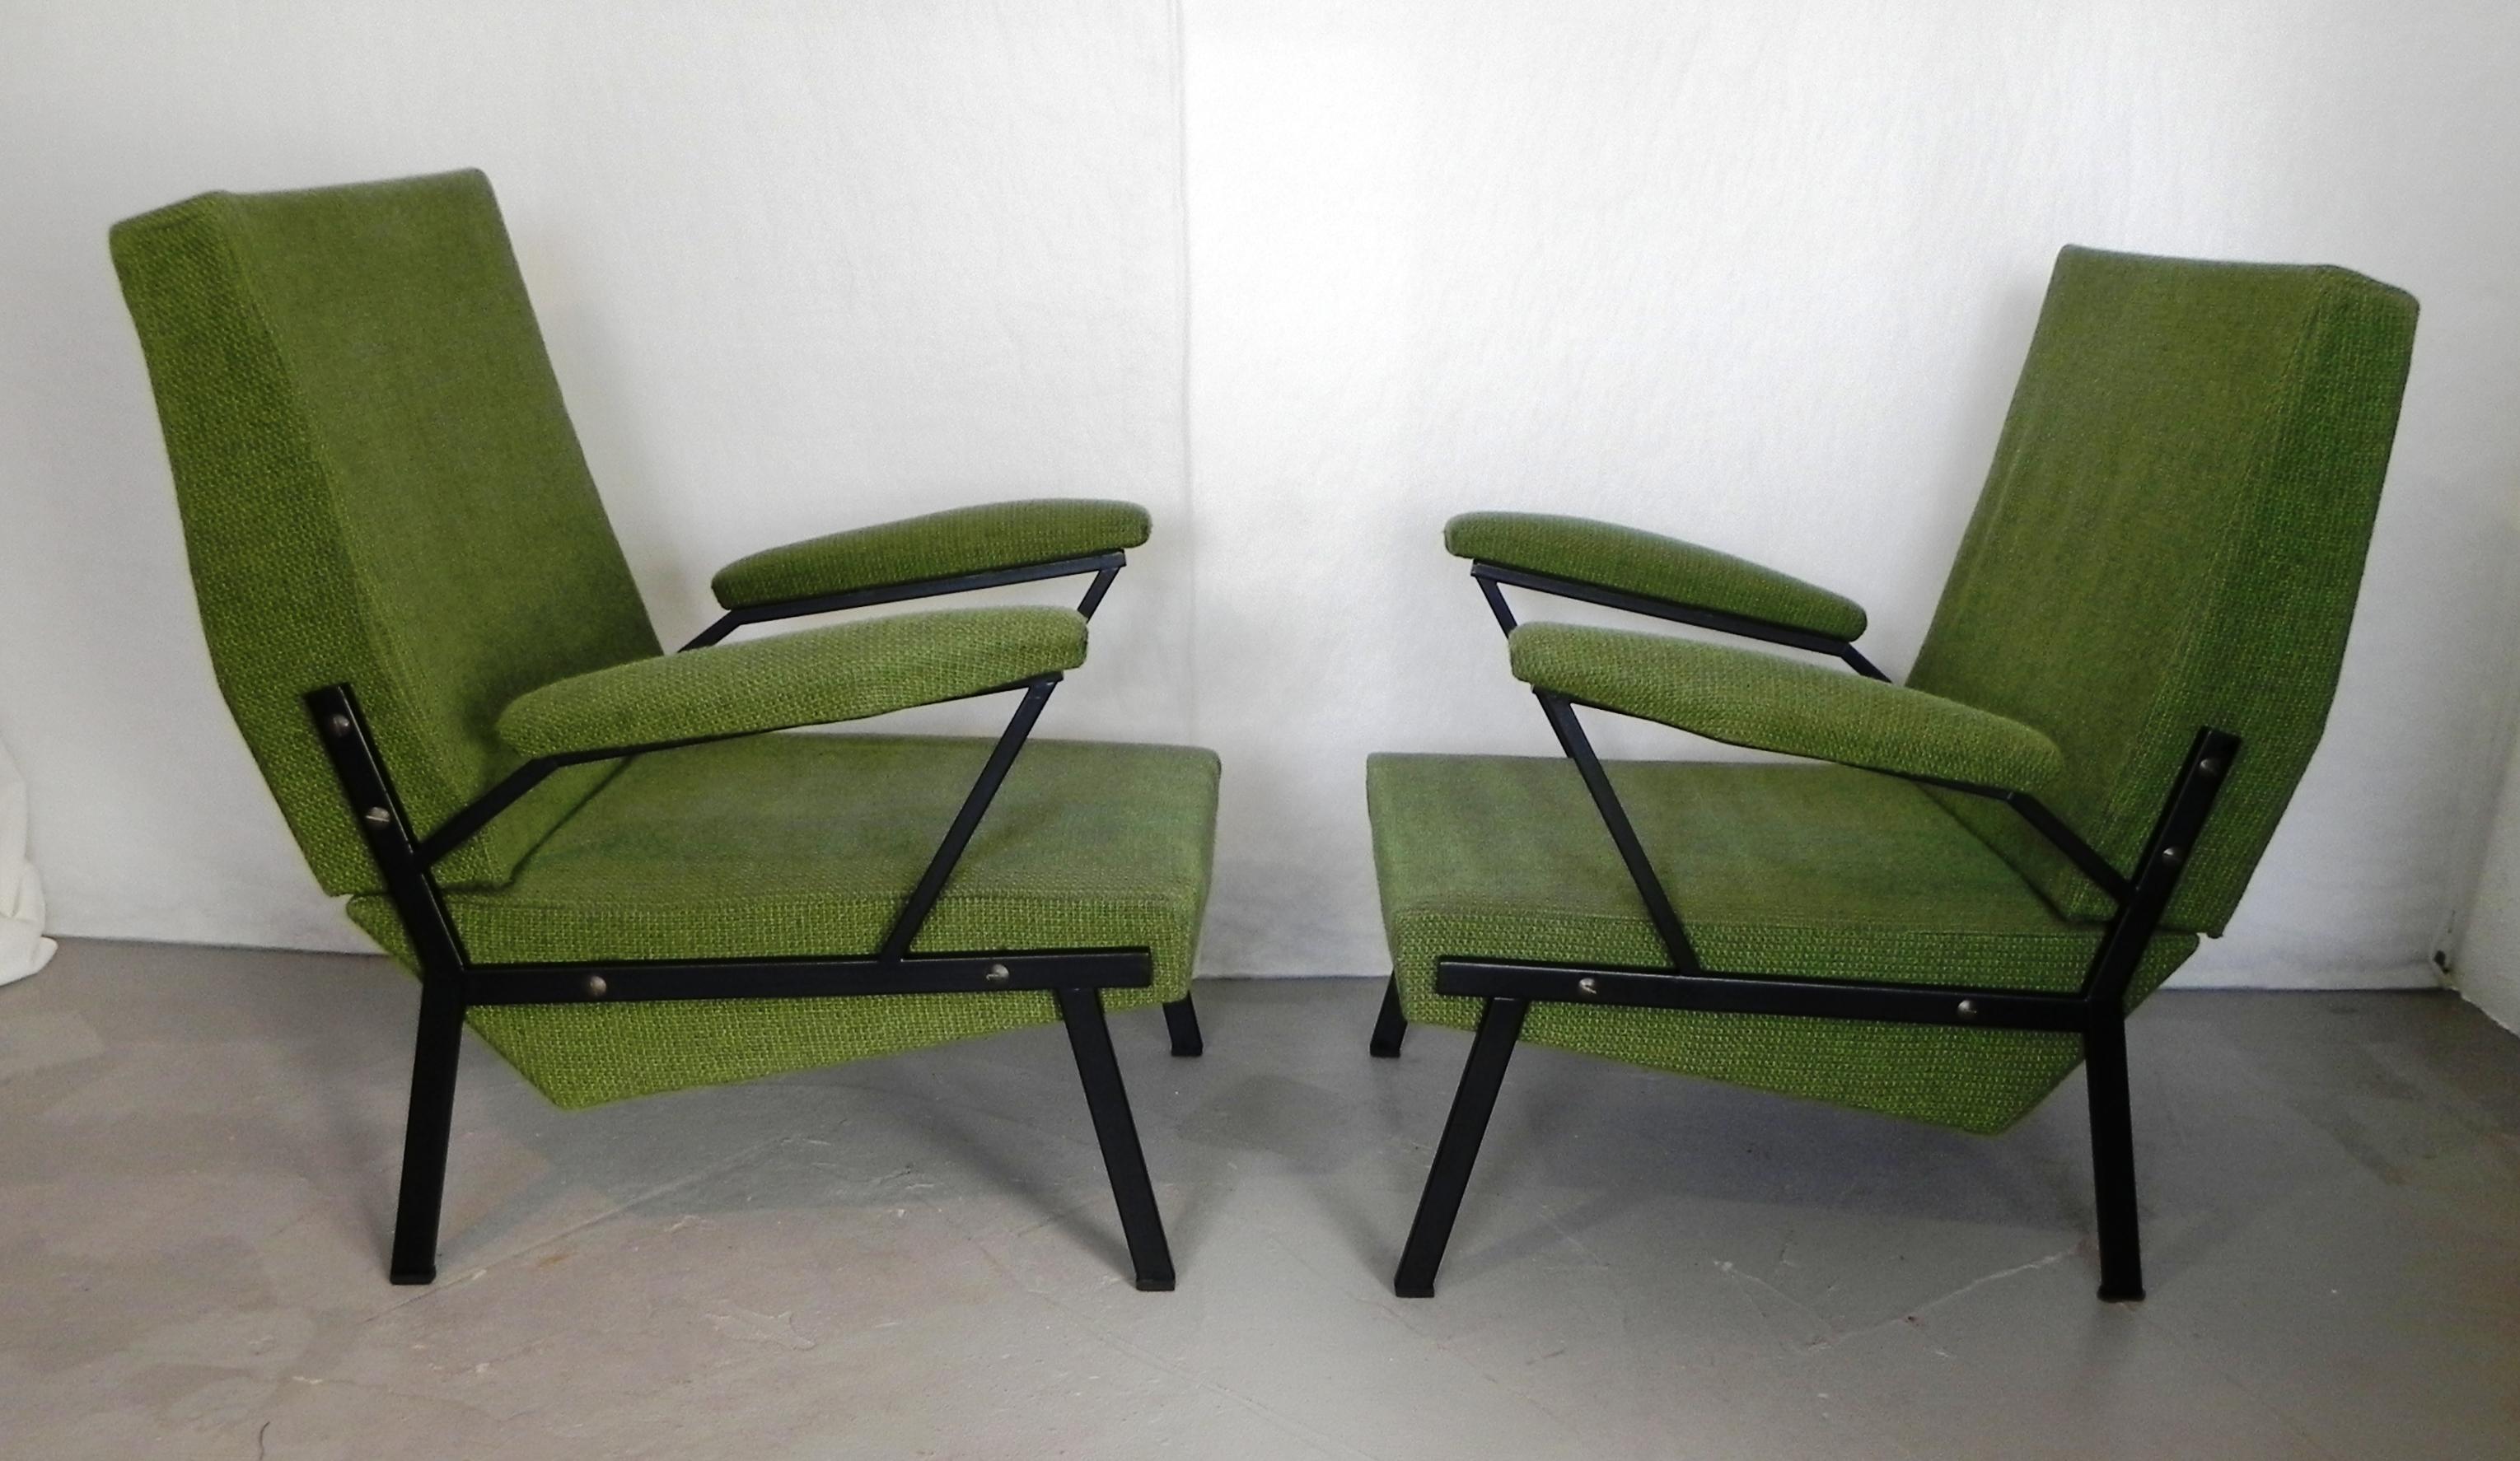 2 armchairs from the 1960s. typical mid-century modern style iron feet/frame. wooden shaft. original coarse weave fabric upholstery. the armchairs have been completely cleaned and sanitized. the upholstery fabric and underlying straps are well